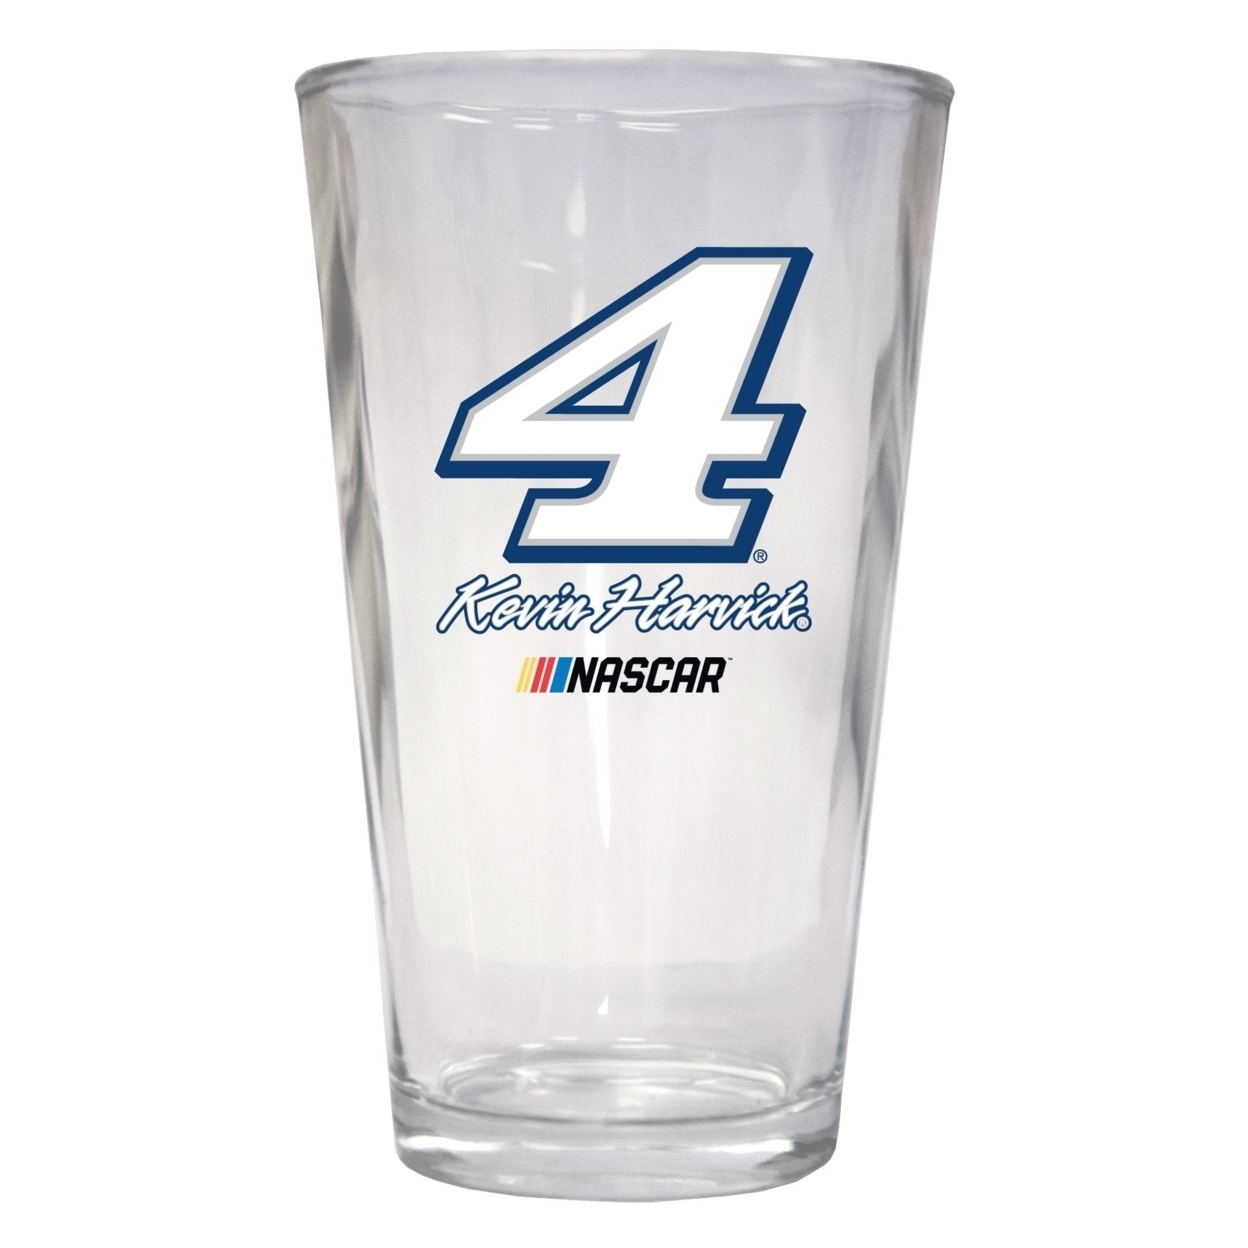 Kevin Harvick #4 NASCAR Pint Glass New For 2020